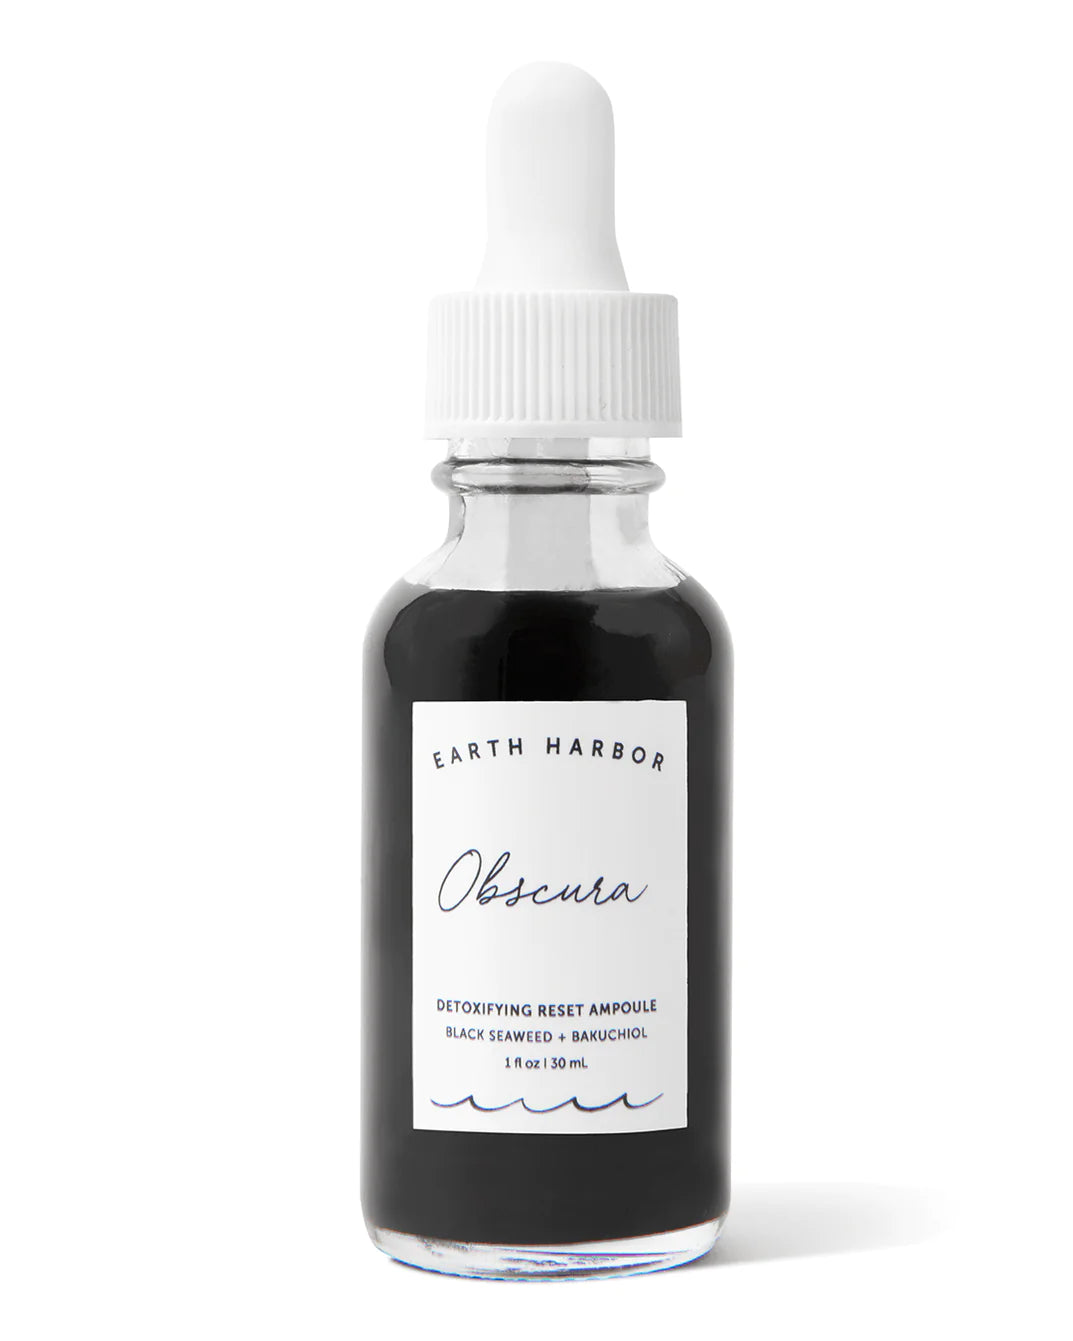 Earth Harbor Obscura Detoxifying Reset Ampoule